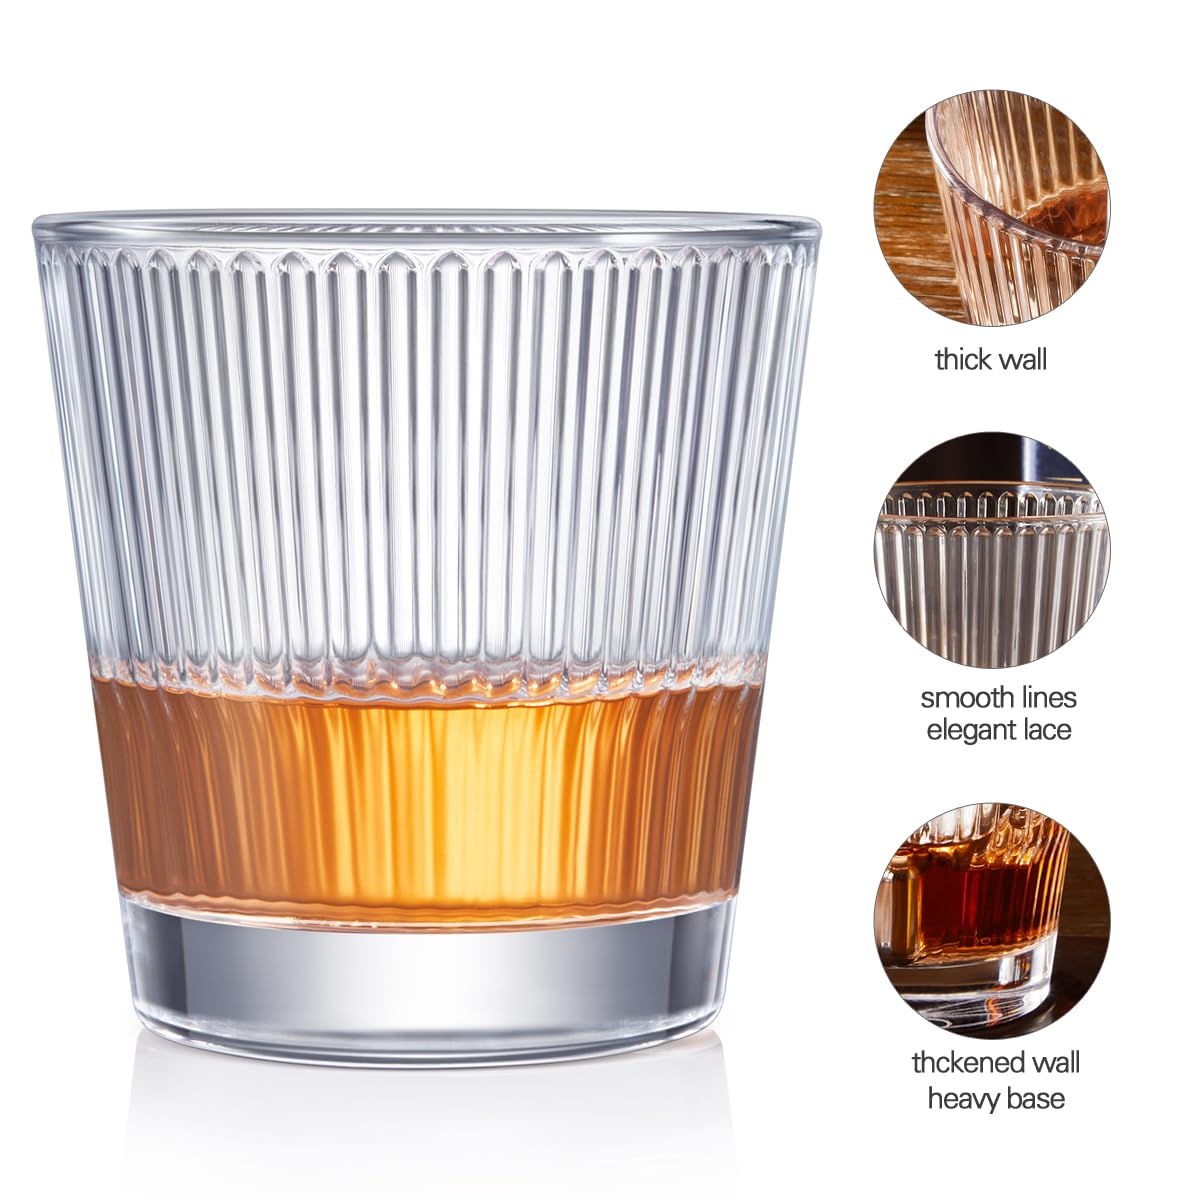 ANBFF Whiskey Glasses Set of 2, 10oz Drinking Glass Cups, Heavy Bottom Rocks Glasses, Crystal Old Fashioned Glass with Gift Box - Barware for Bourbon, Scotch, Cocktail for Men Women